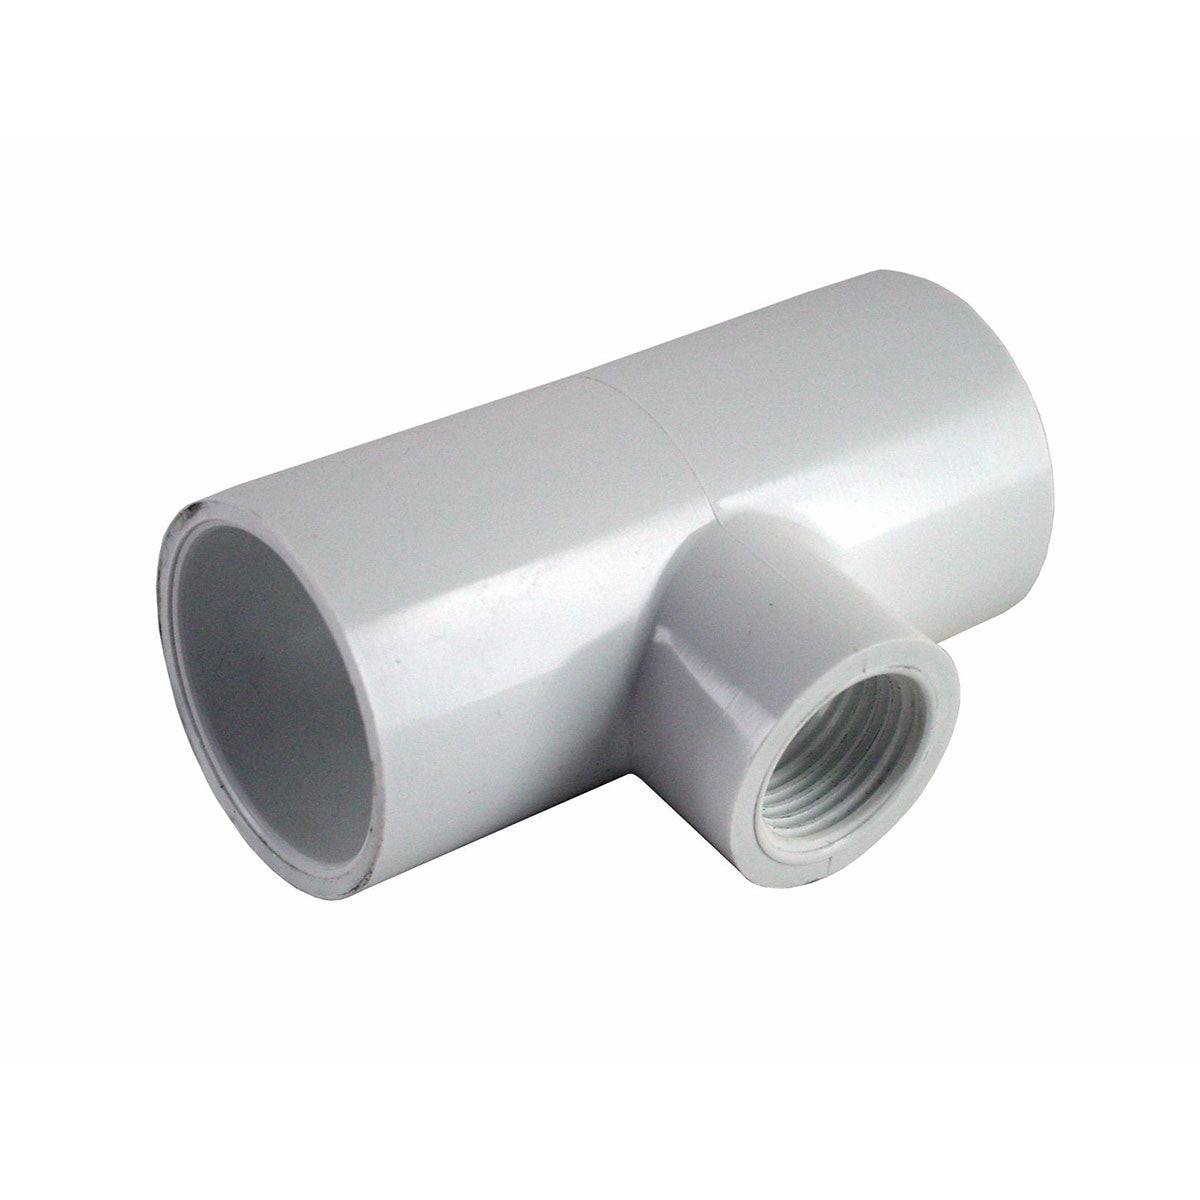 PVC Fitting Faucet Tee CL18 CAT21 AS1477